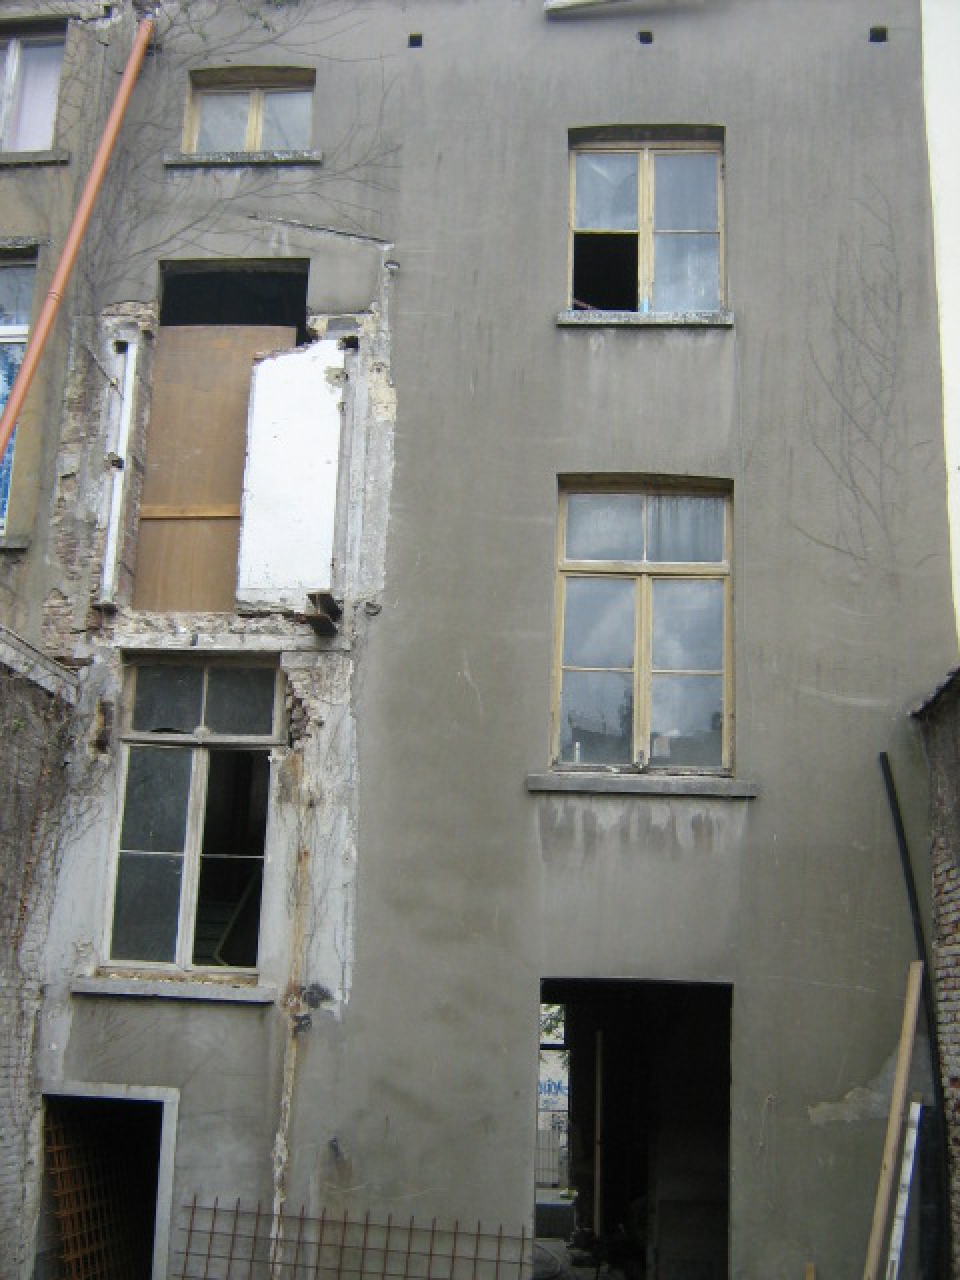 Renovation of a residential building